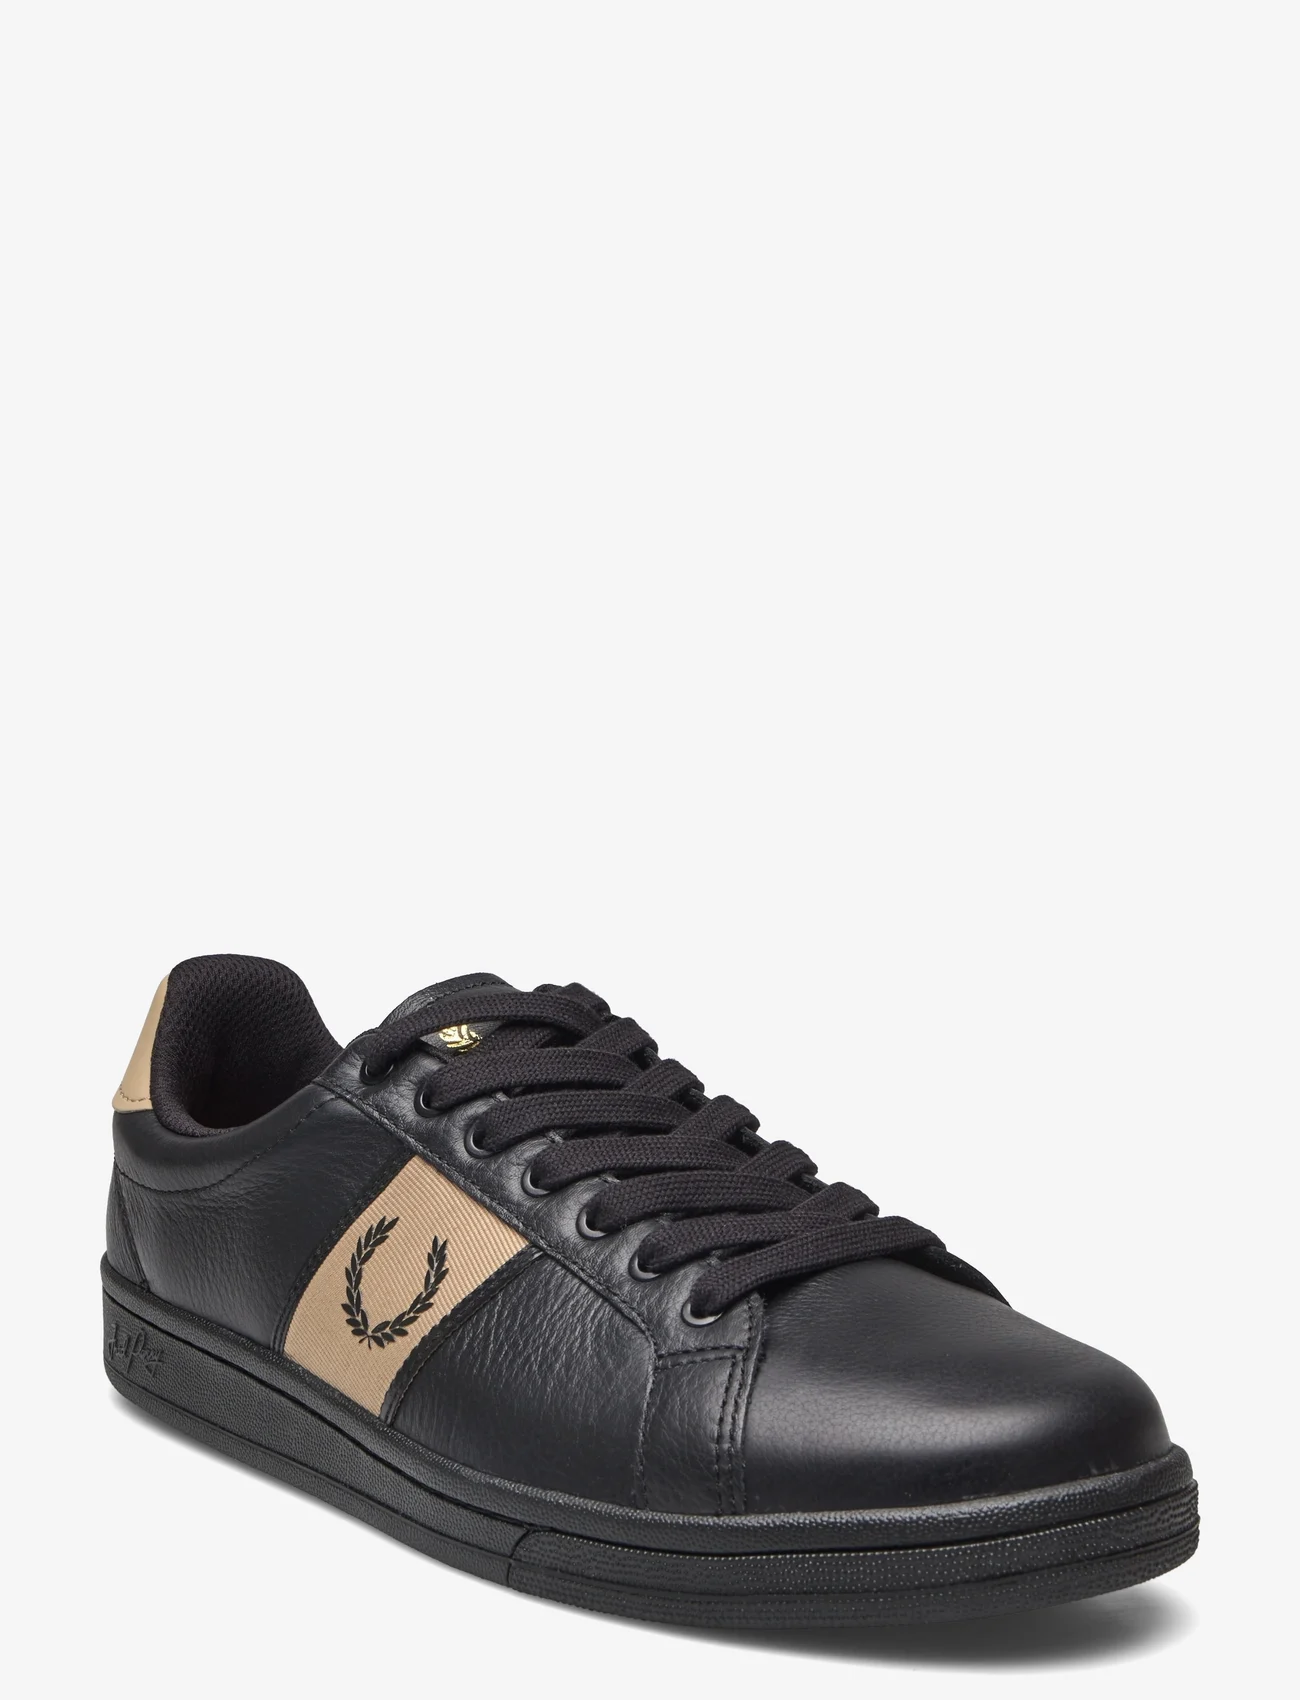 Fred Perry - B721 LTHR/BRANDED WEBBING - lave sneakers - black/warm stone - 0